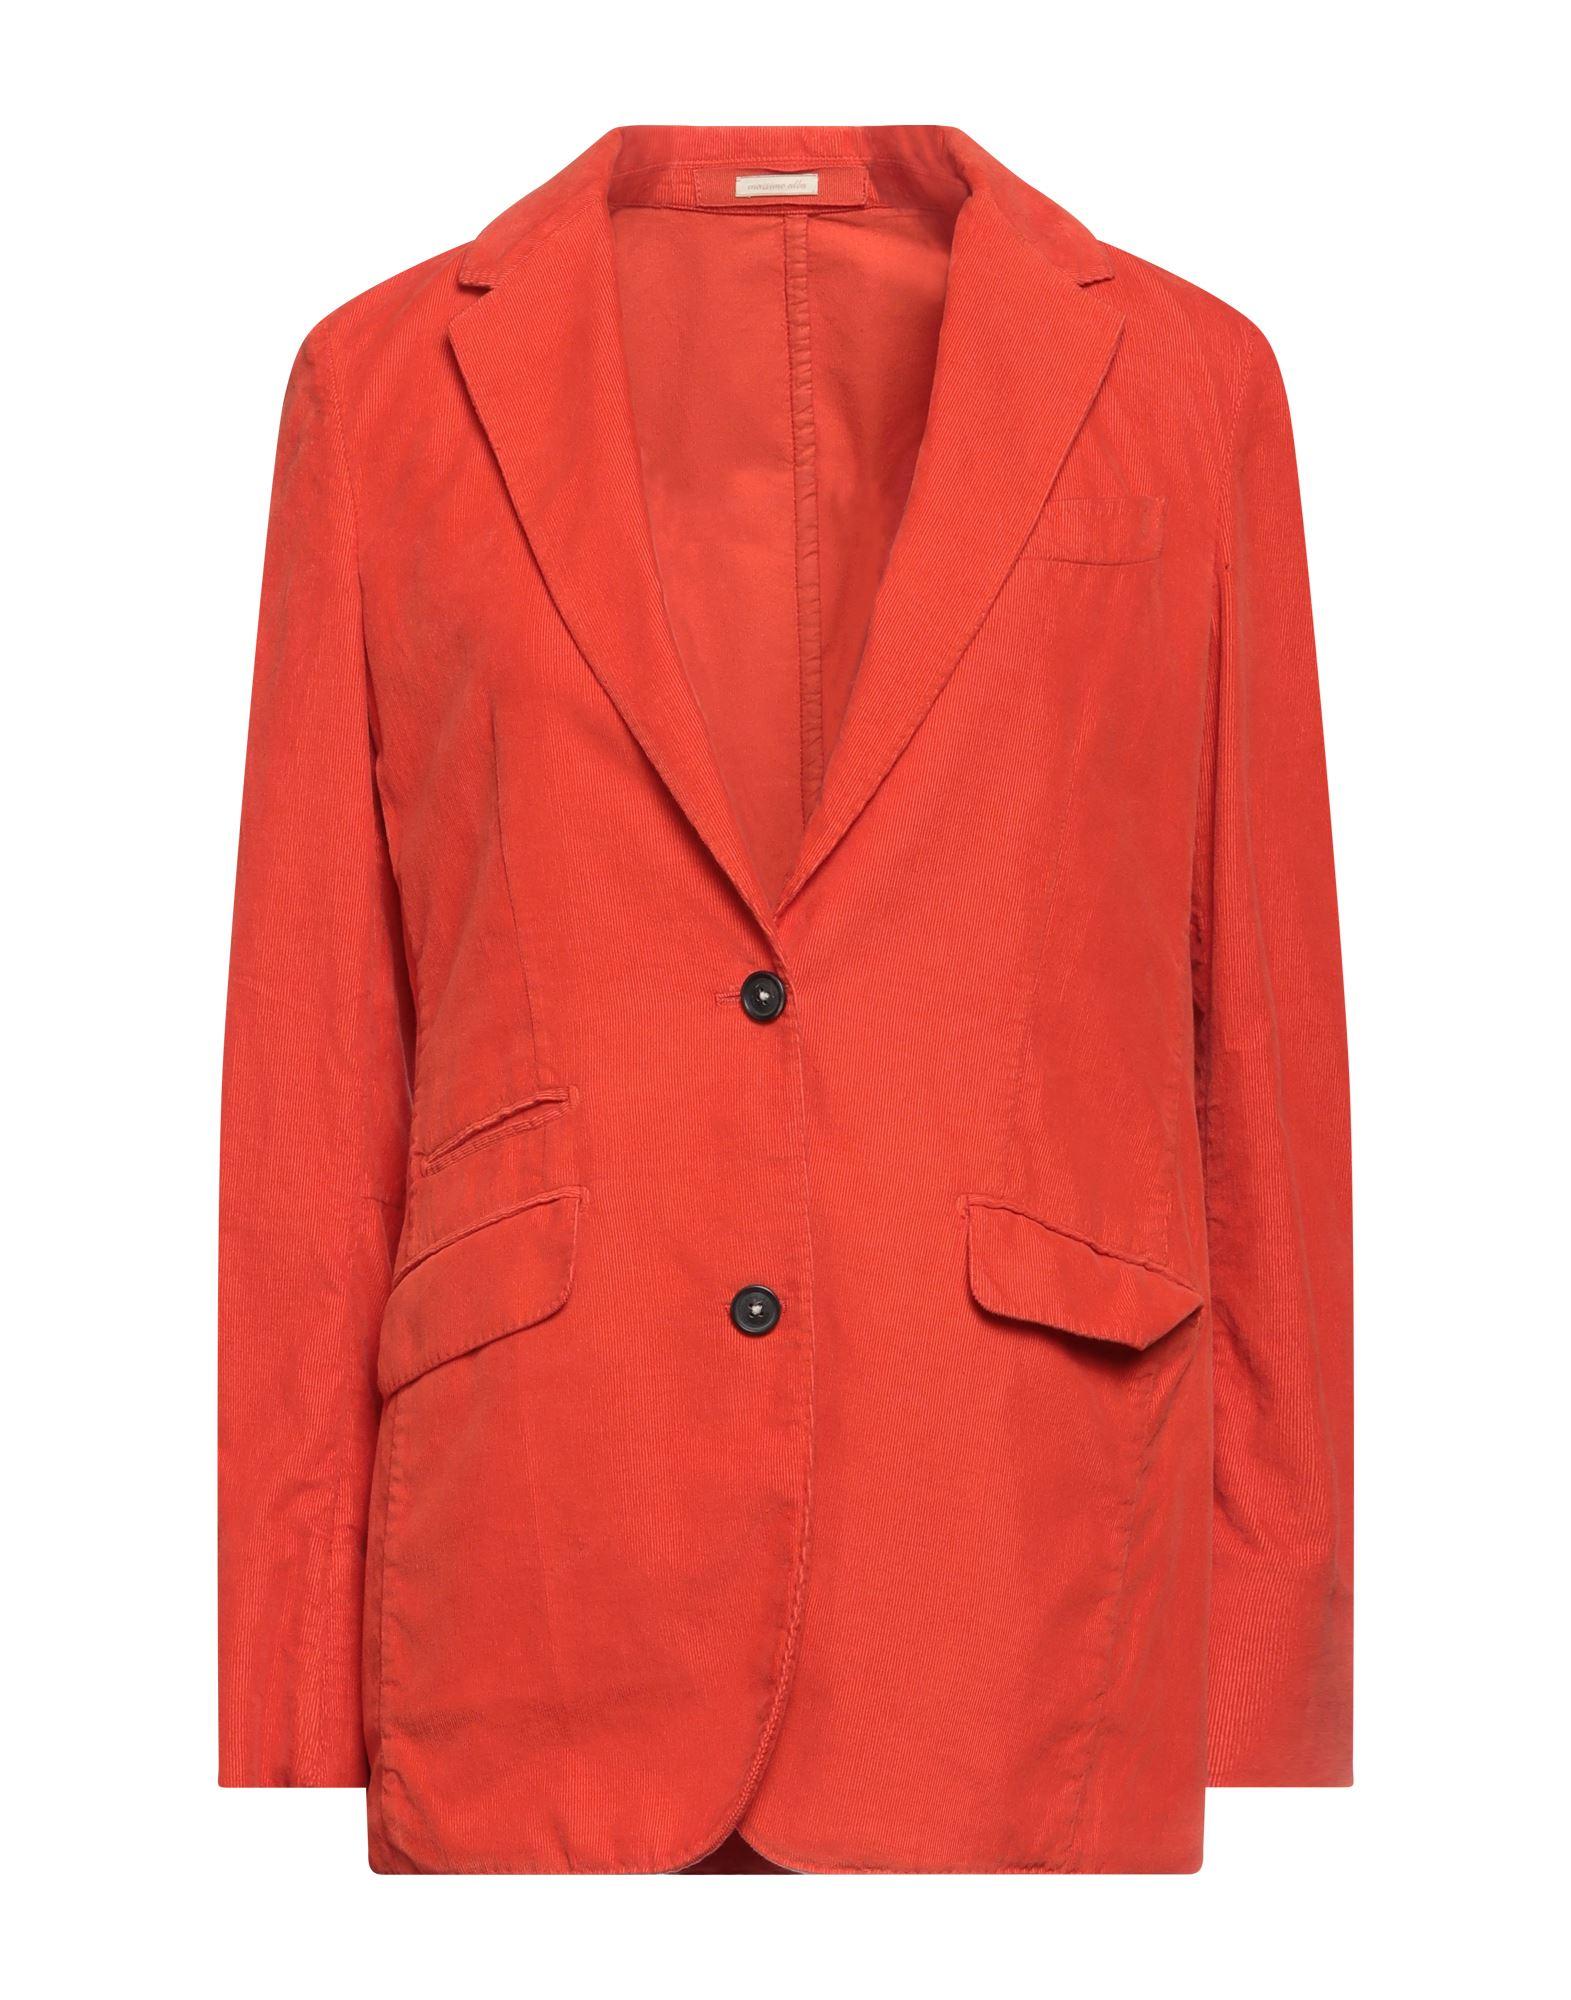 Massimo Alba Suit Jacket in Red | Lyst